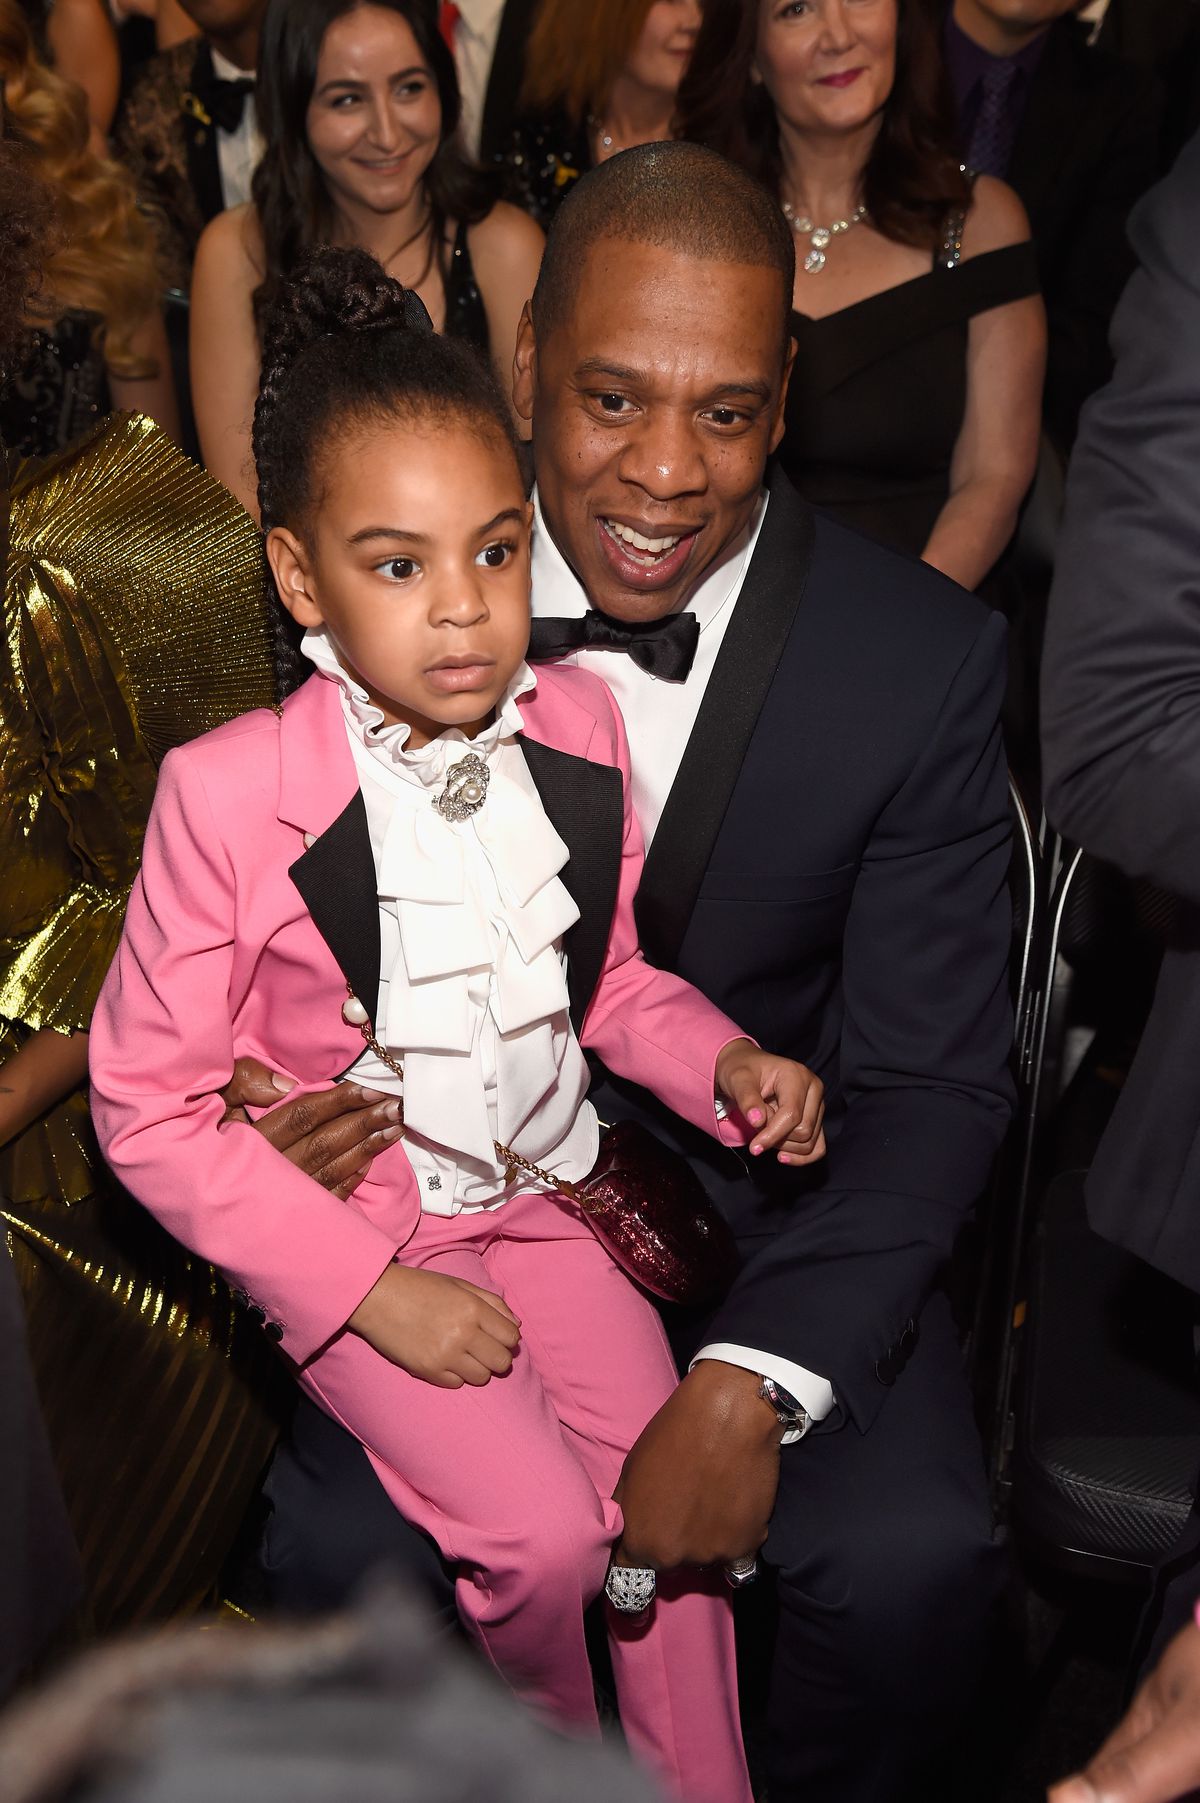 Blue Ivy Carter and Jay Z at the Grammys 2017